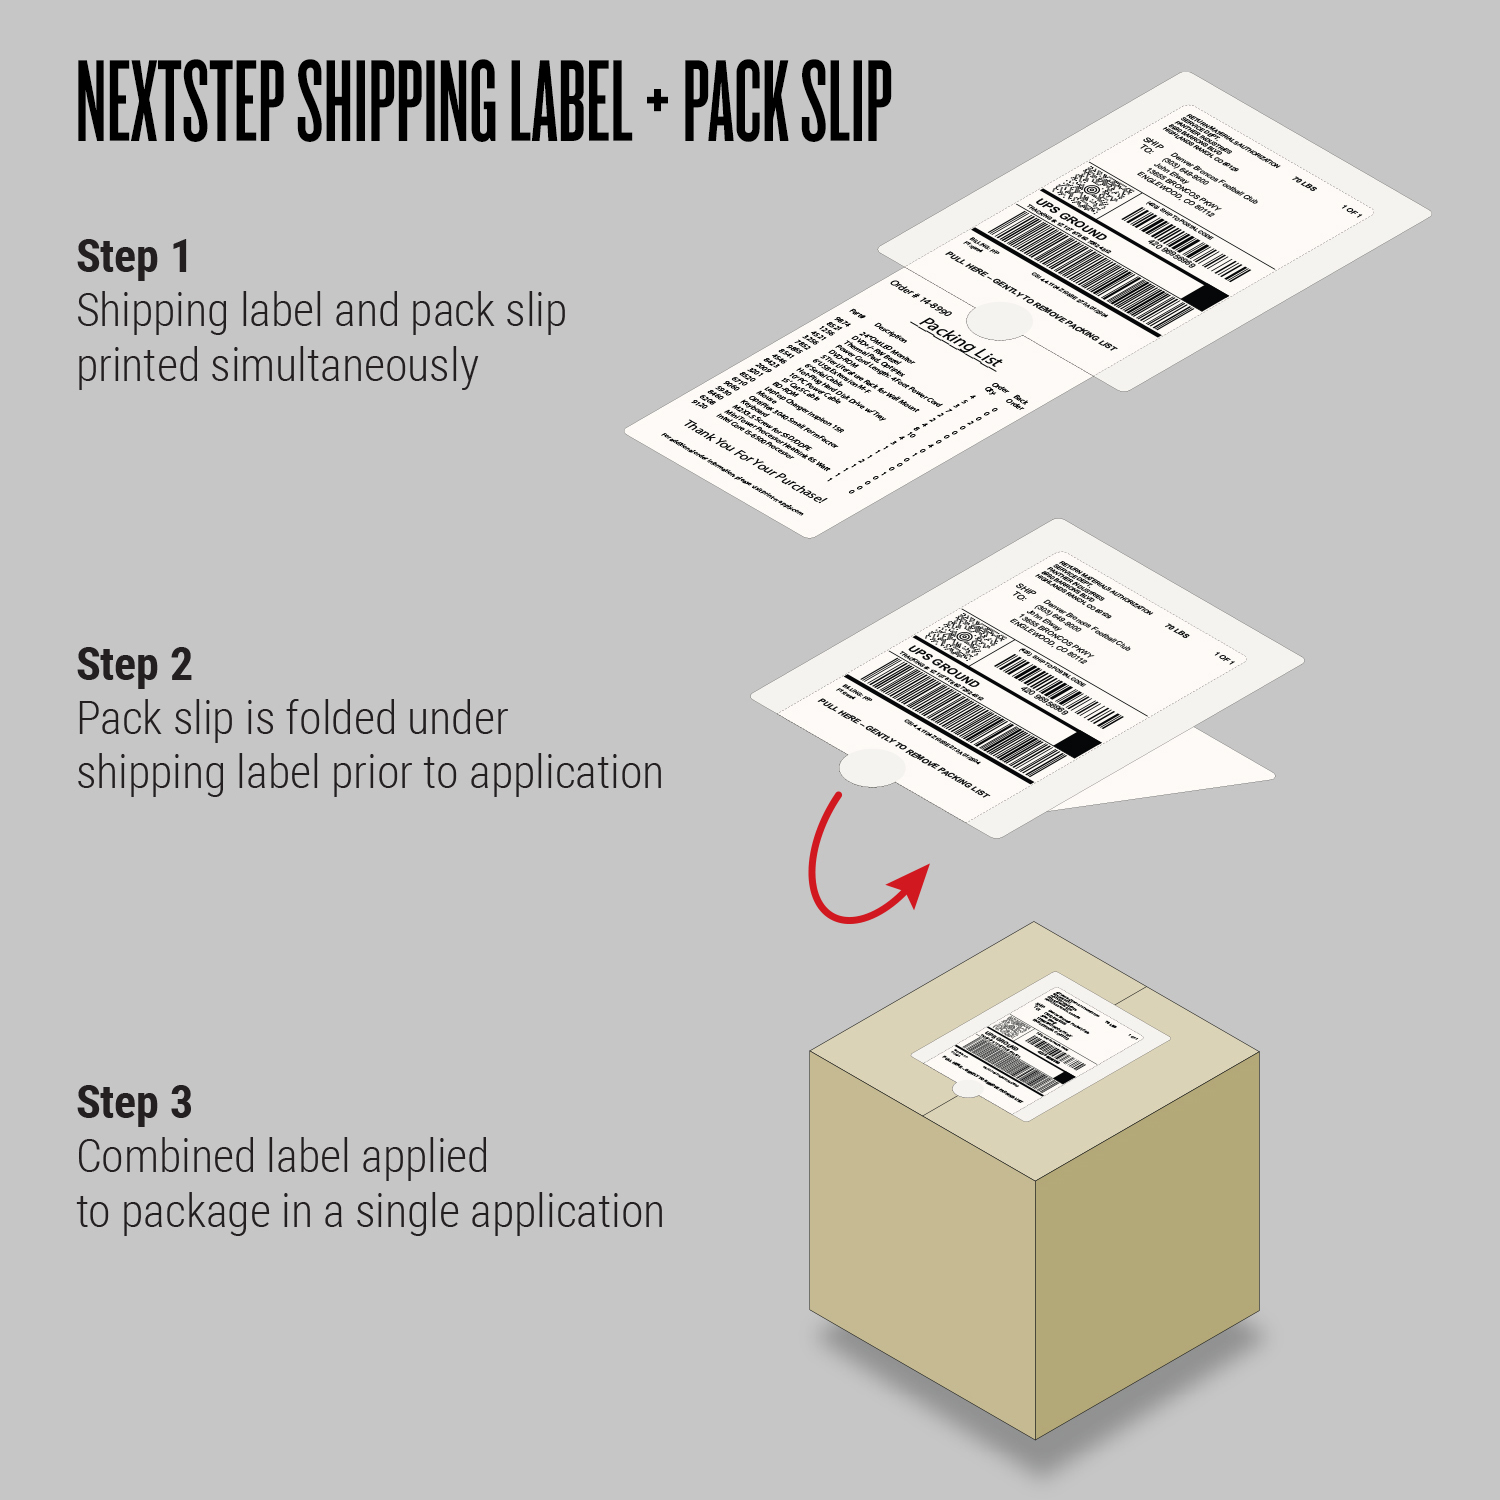 Everything you need to know about Packing Slip - Fulfillment Hub USA